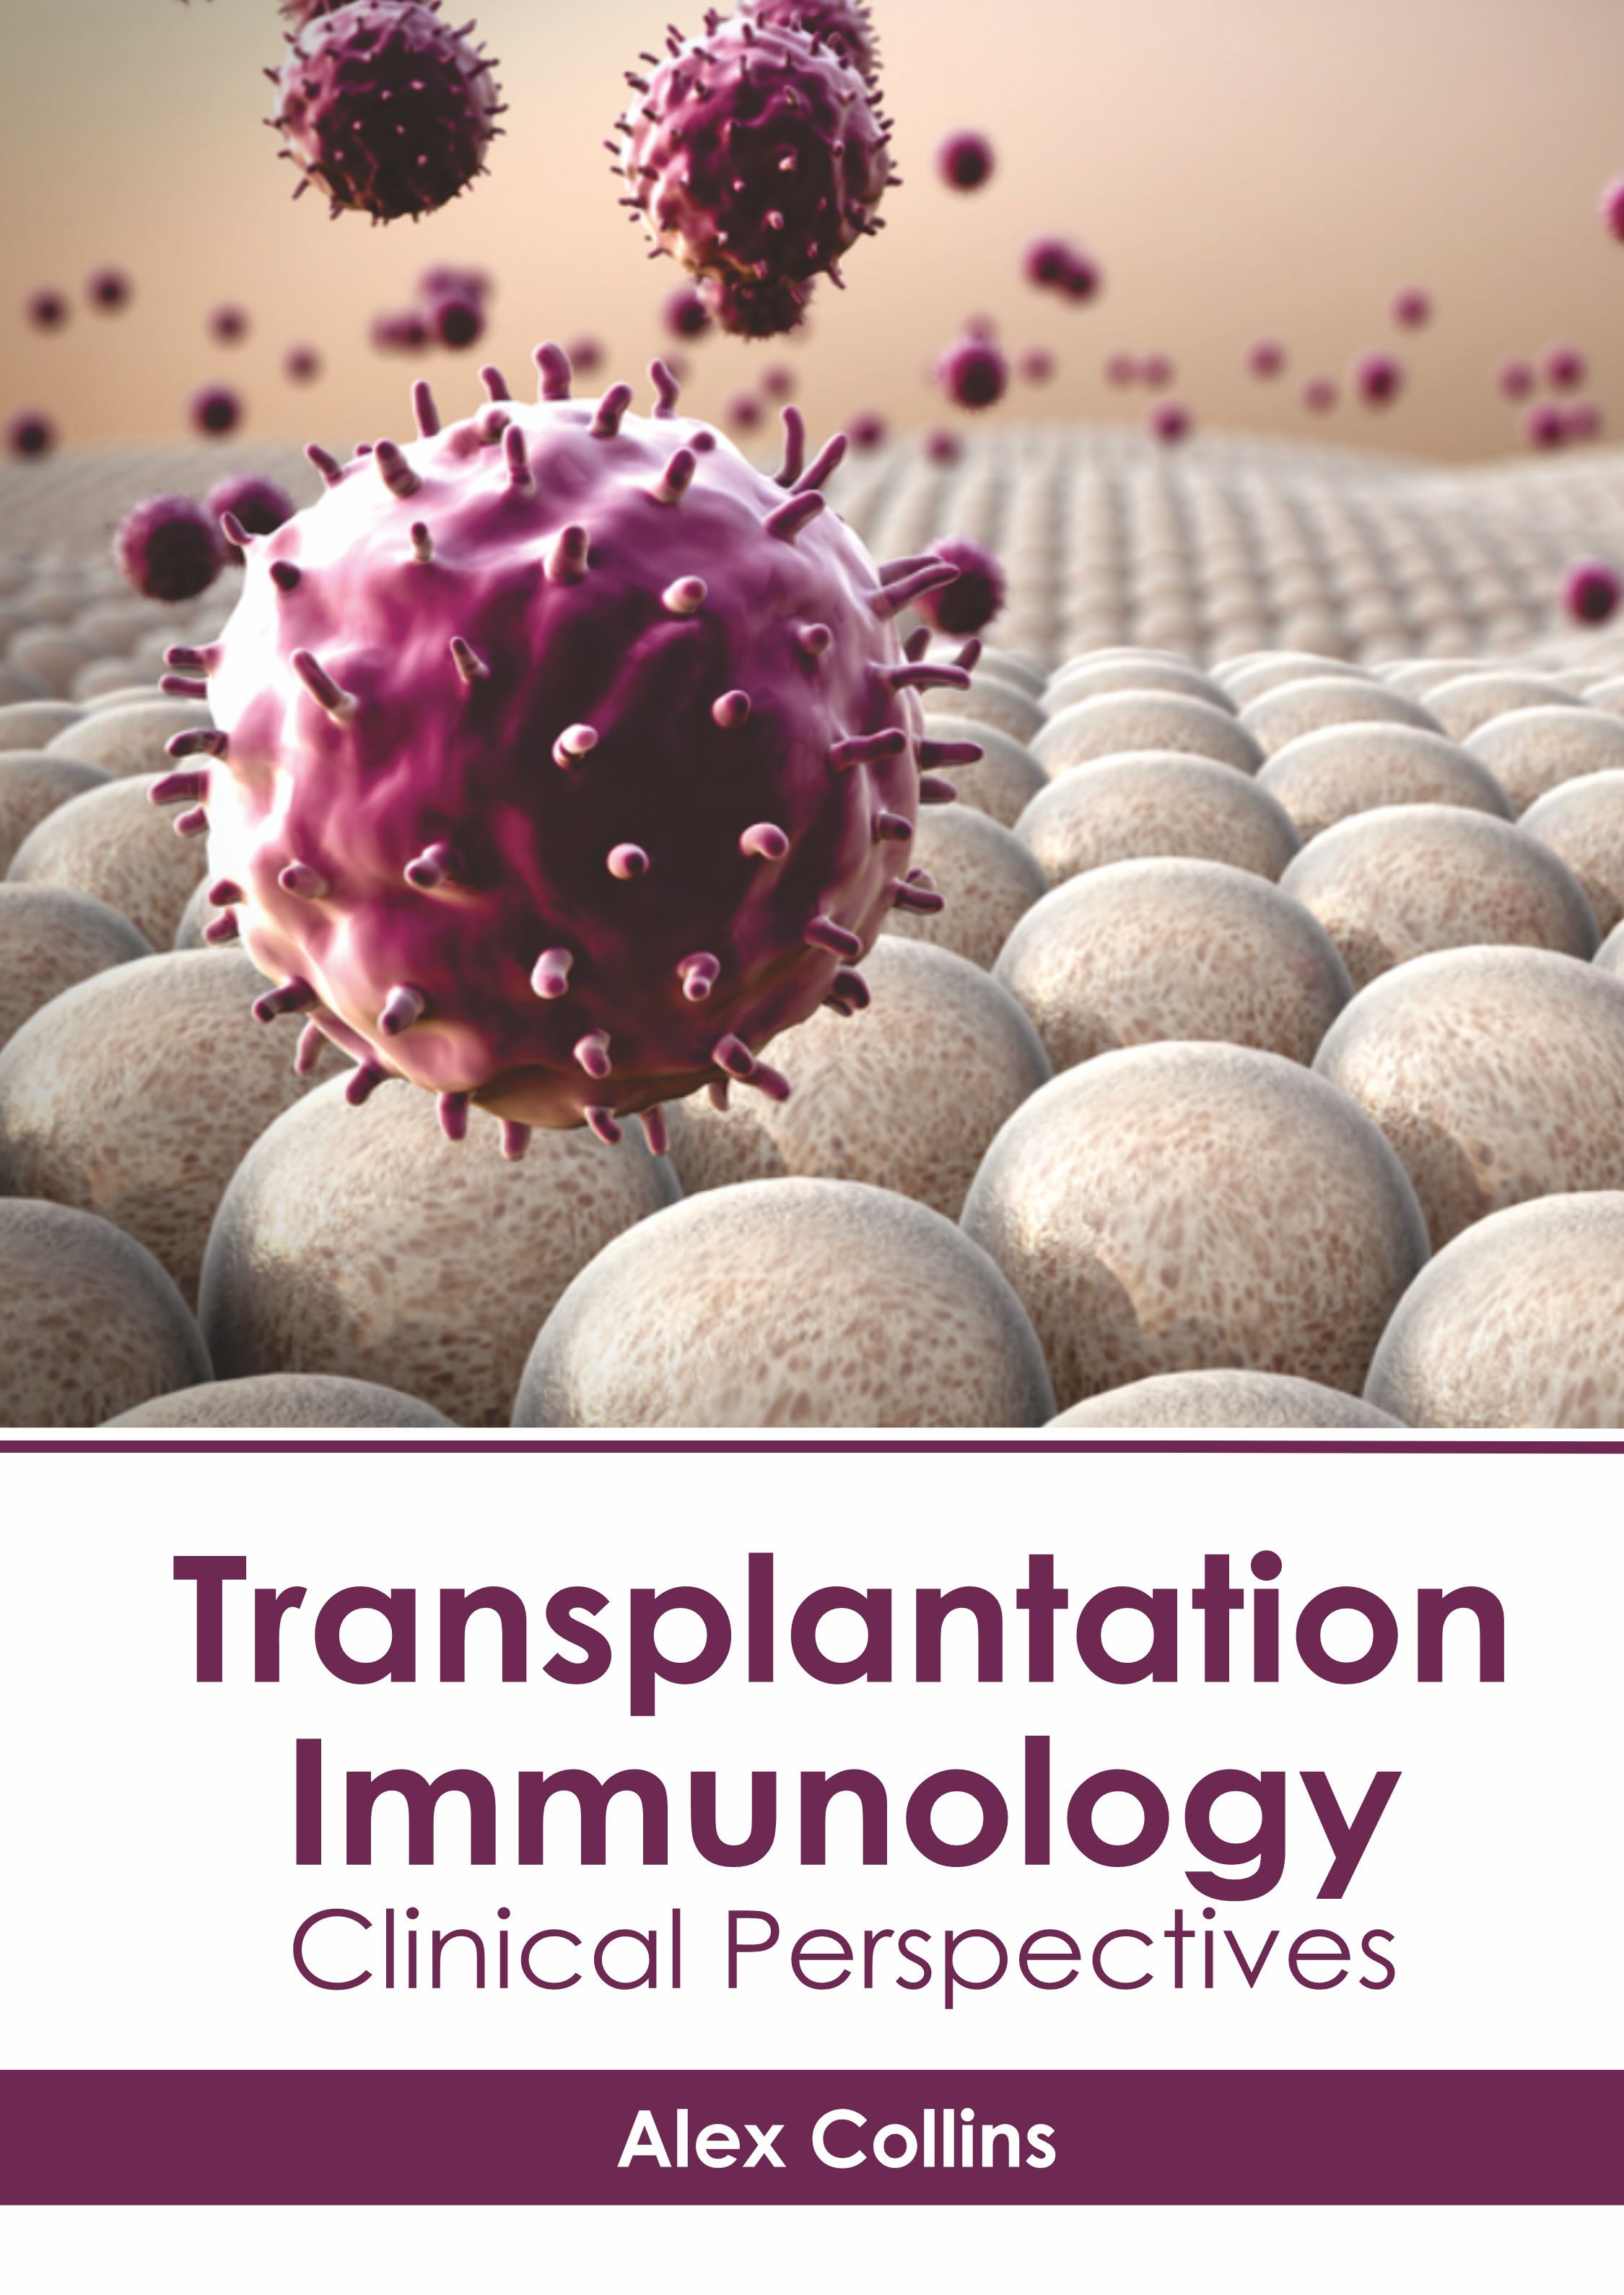 
exclusive-publishers/american-medical-publishers/transplantation-immunology-clinical-perspectives-9781639275021